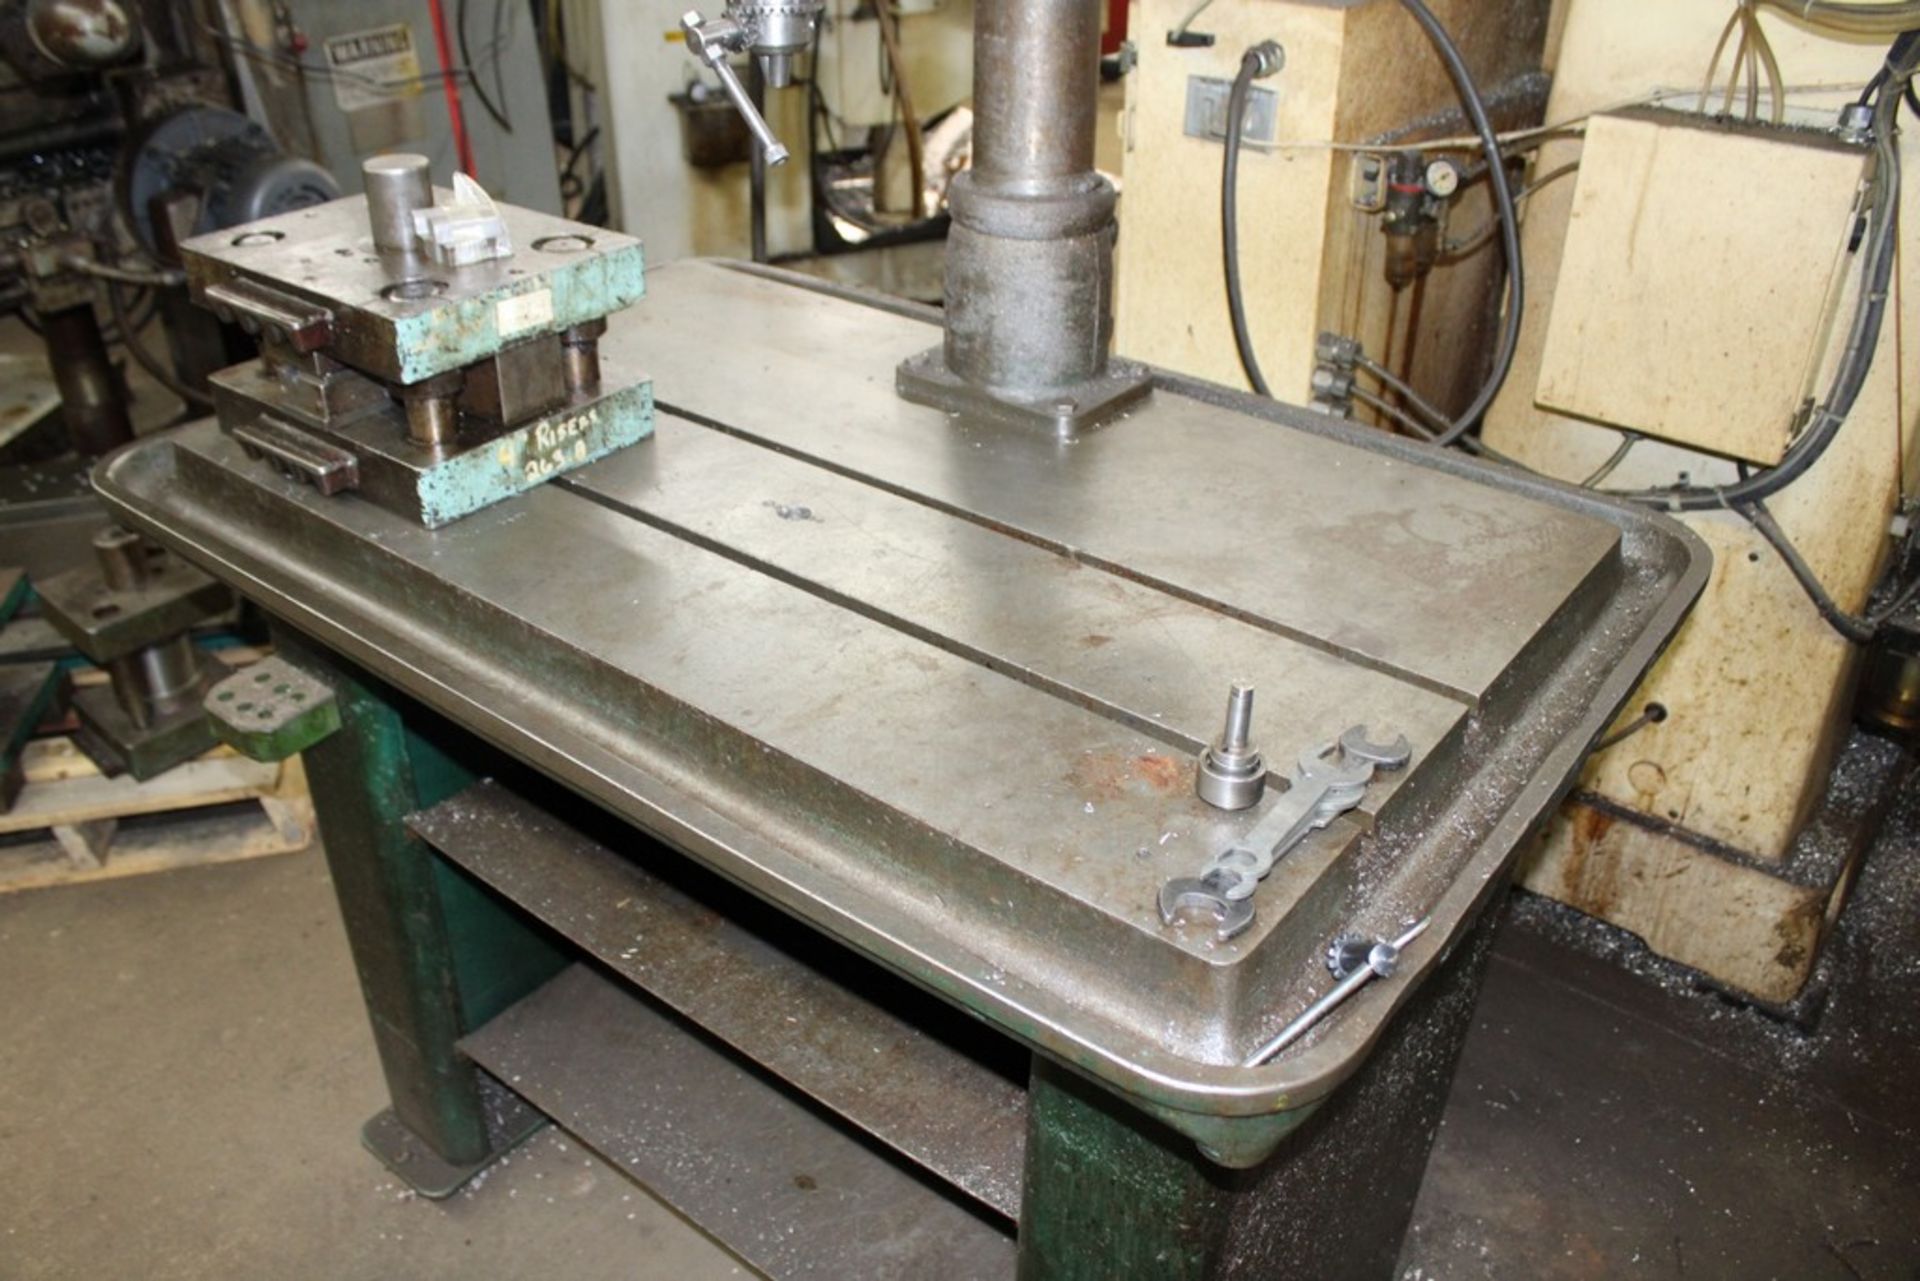 POWERMATIC 20" MODEL 1200 VARIABLE SPEED DRILL,40" X 24" PRODUCTION WORK TABLE - Image 3 of 4